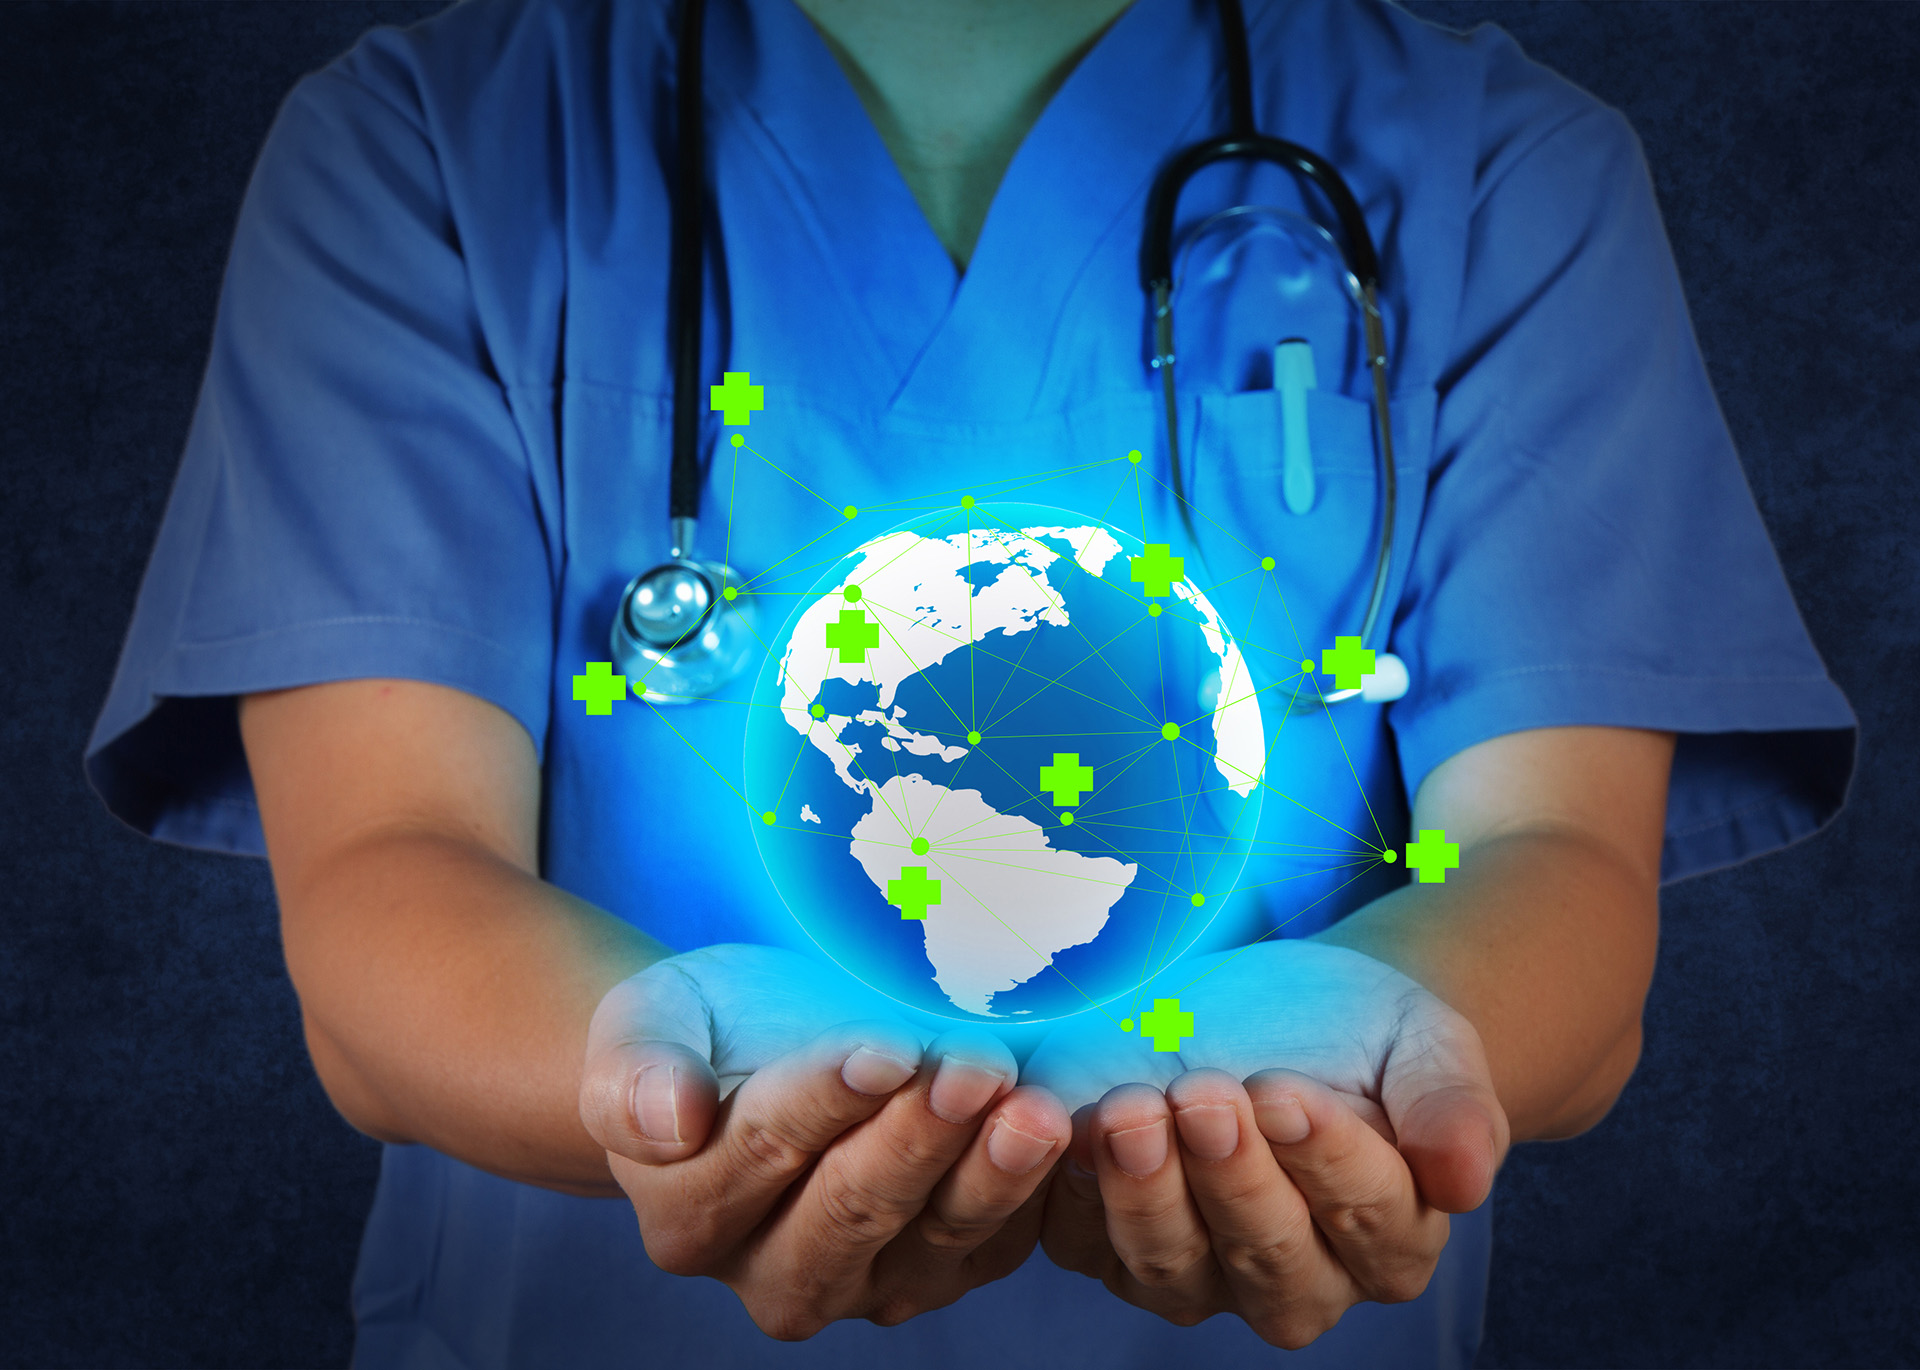 A Doctor holding the world globe in his hands